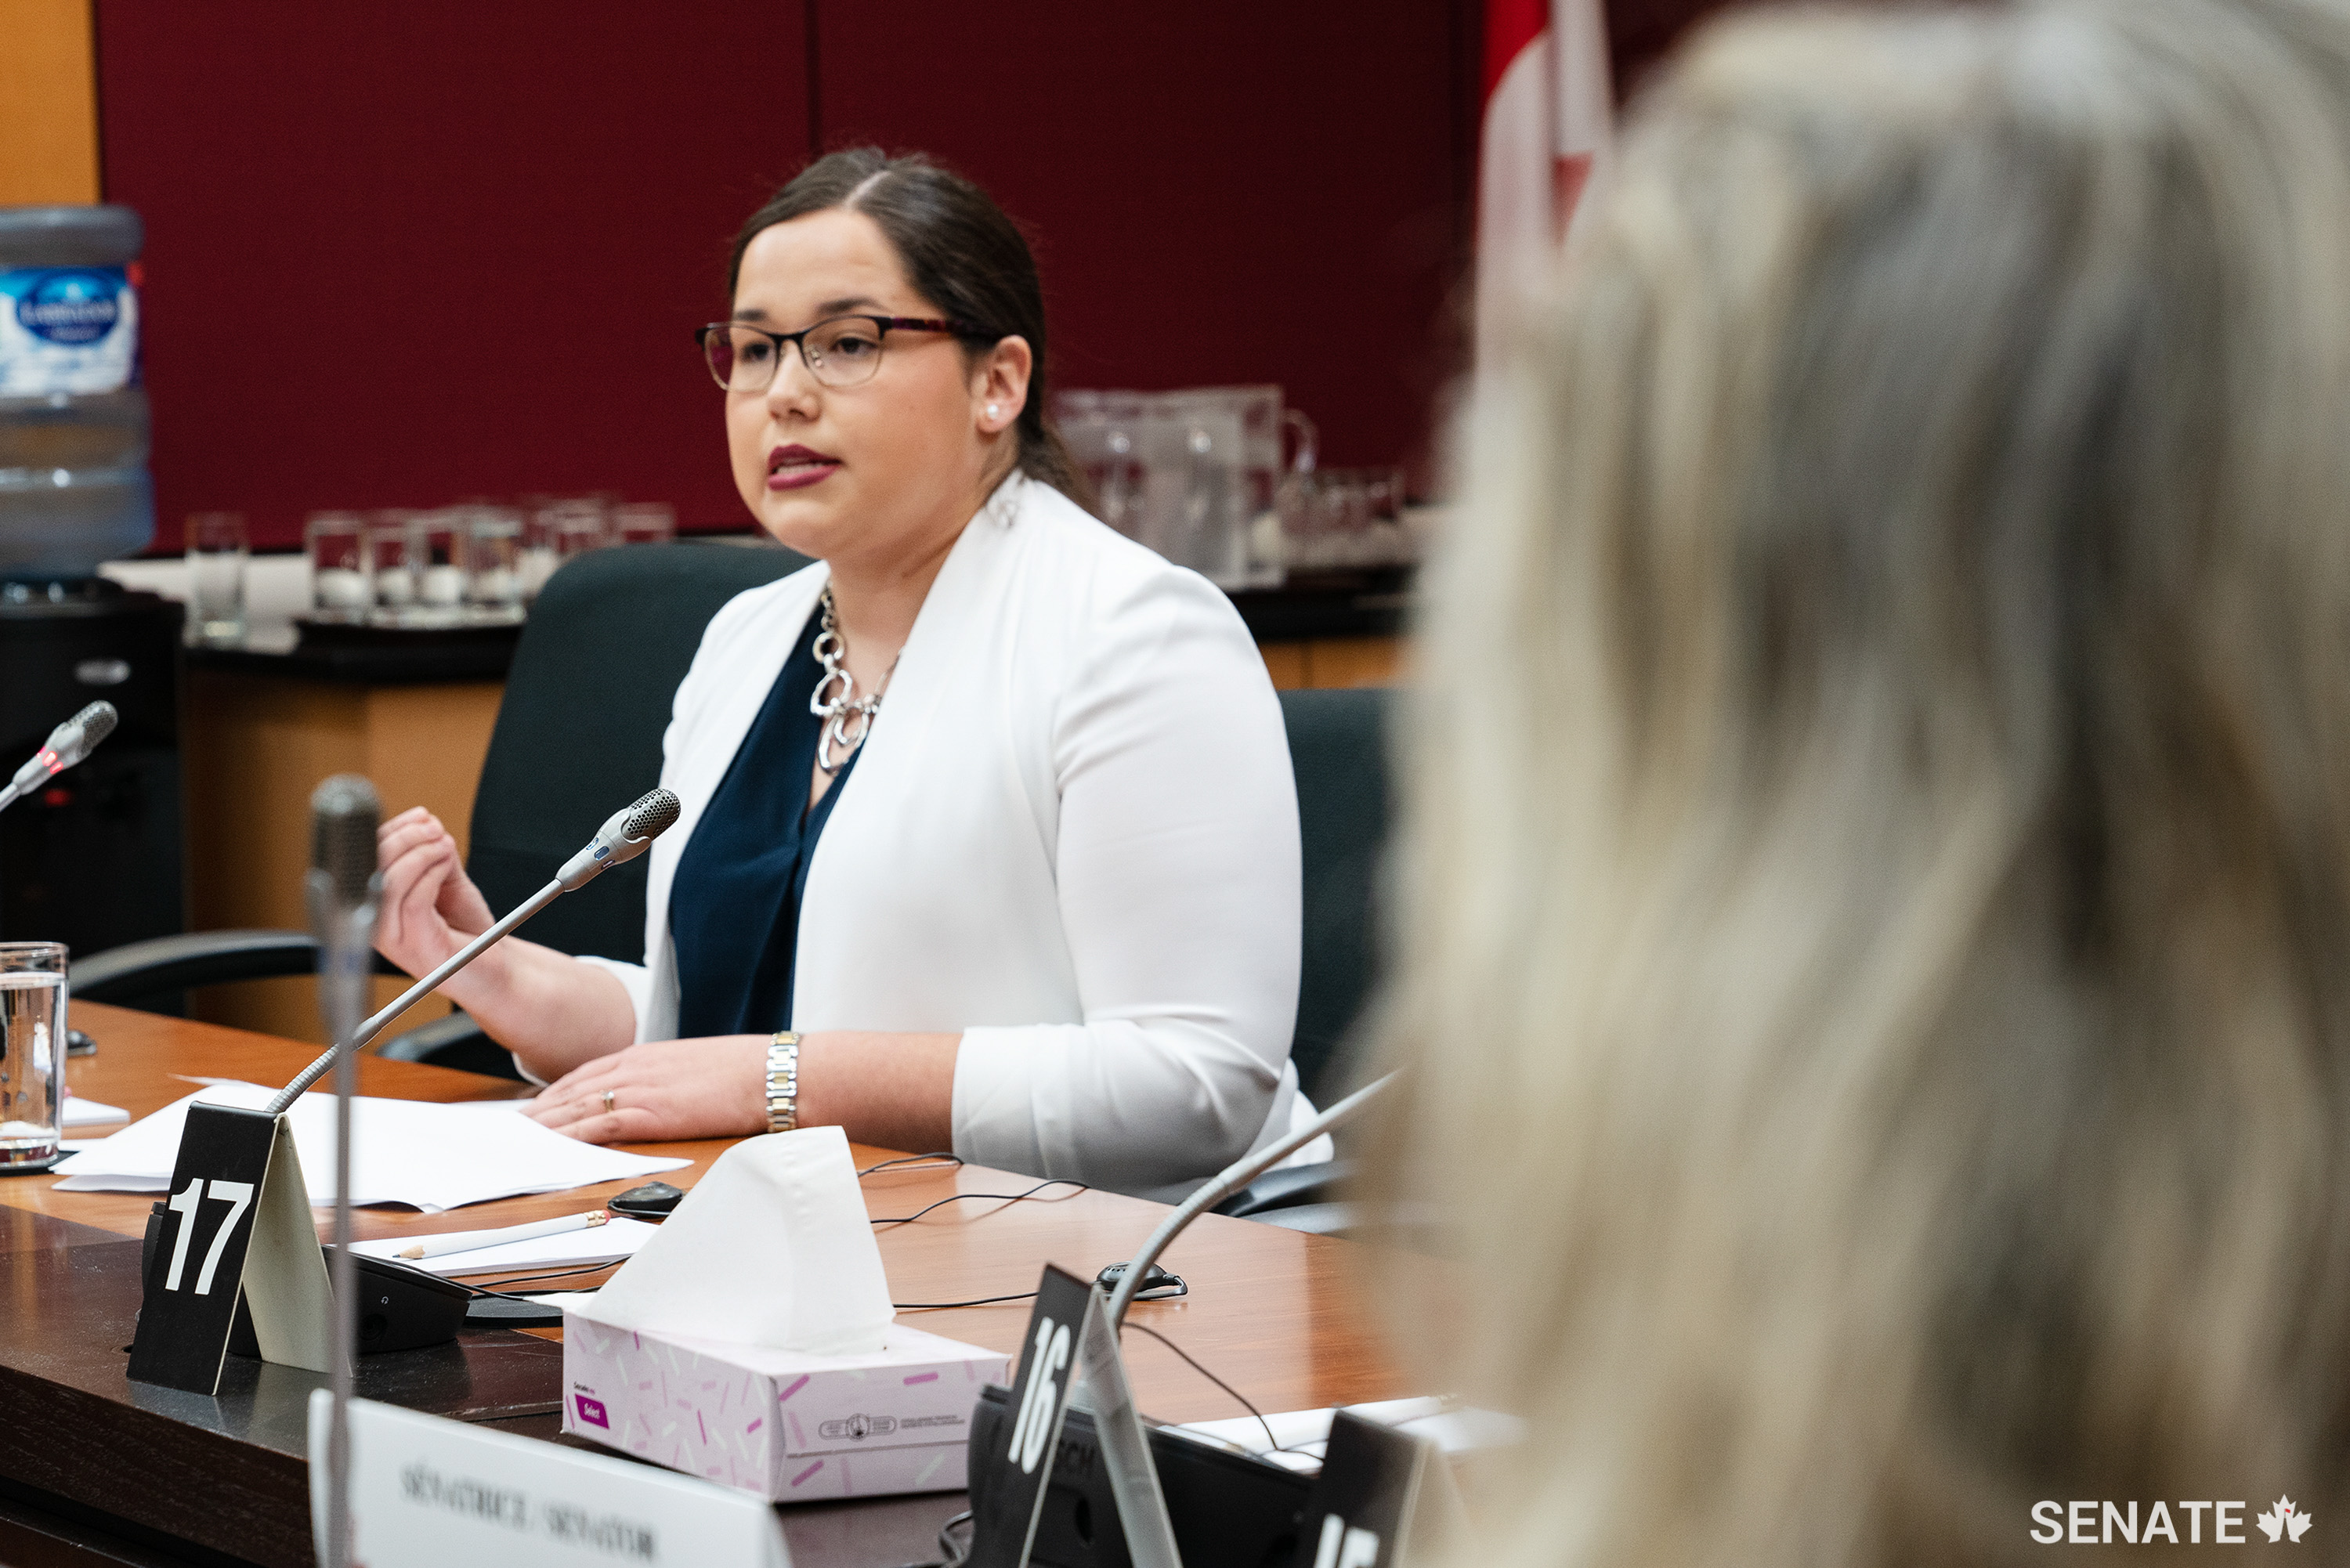 Karlee Johnson, 23, testifies before the Senate Committee on Aboriginal Peoples on June 5, 2019. Karlee lives in the Eskasoni First Nation in Nova Scotia where she volunteers for a special needs support group and the Eskasoni Mi’kmaq Language Initiative.